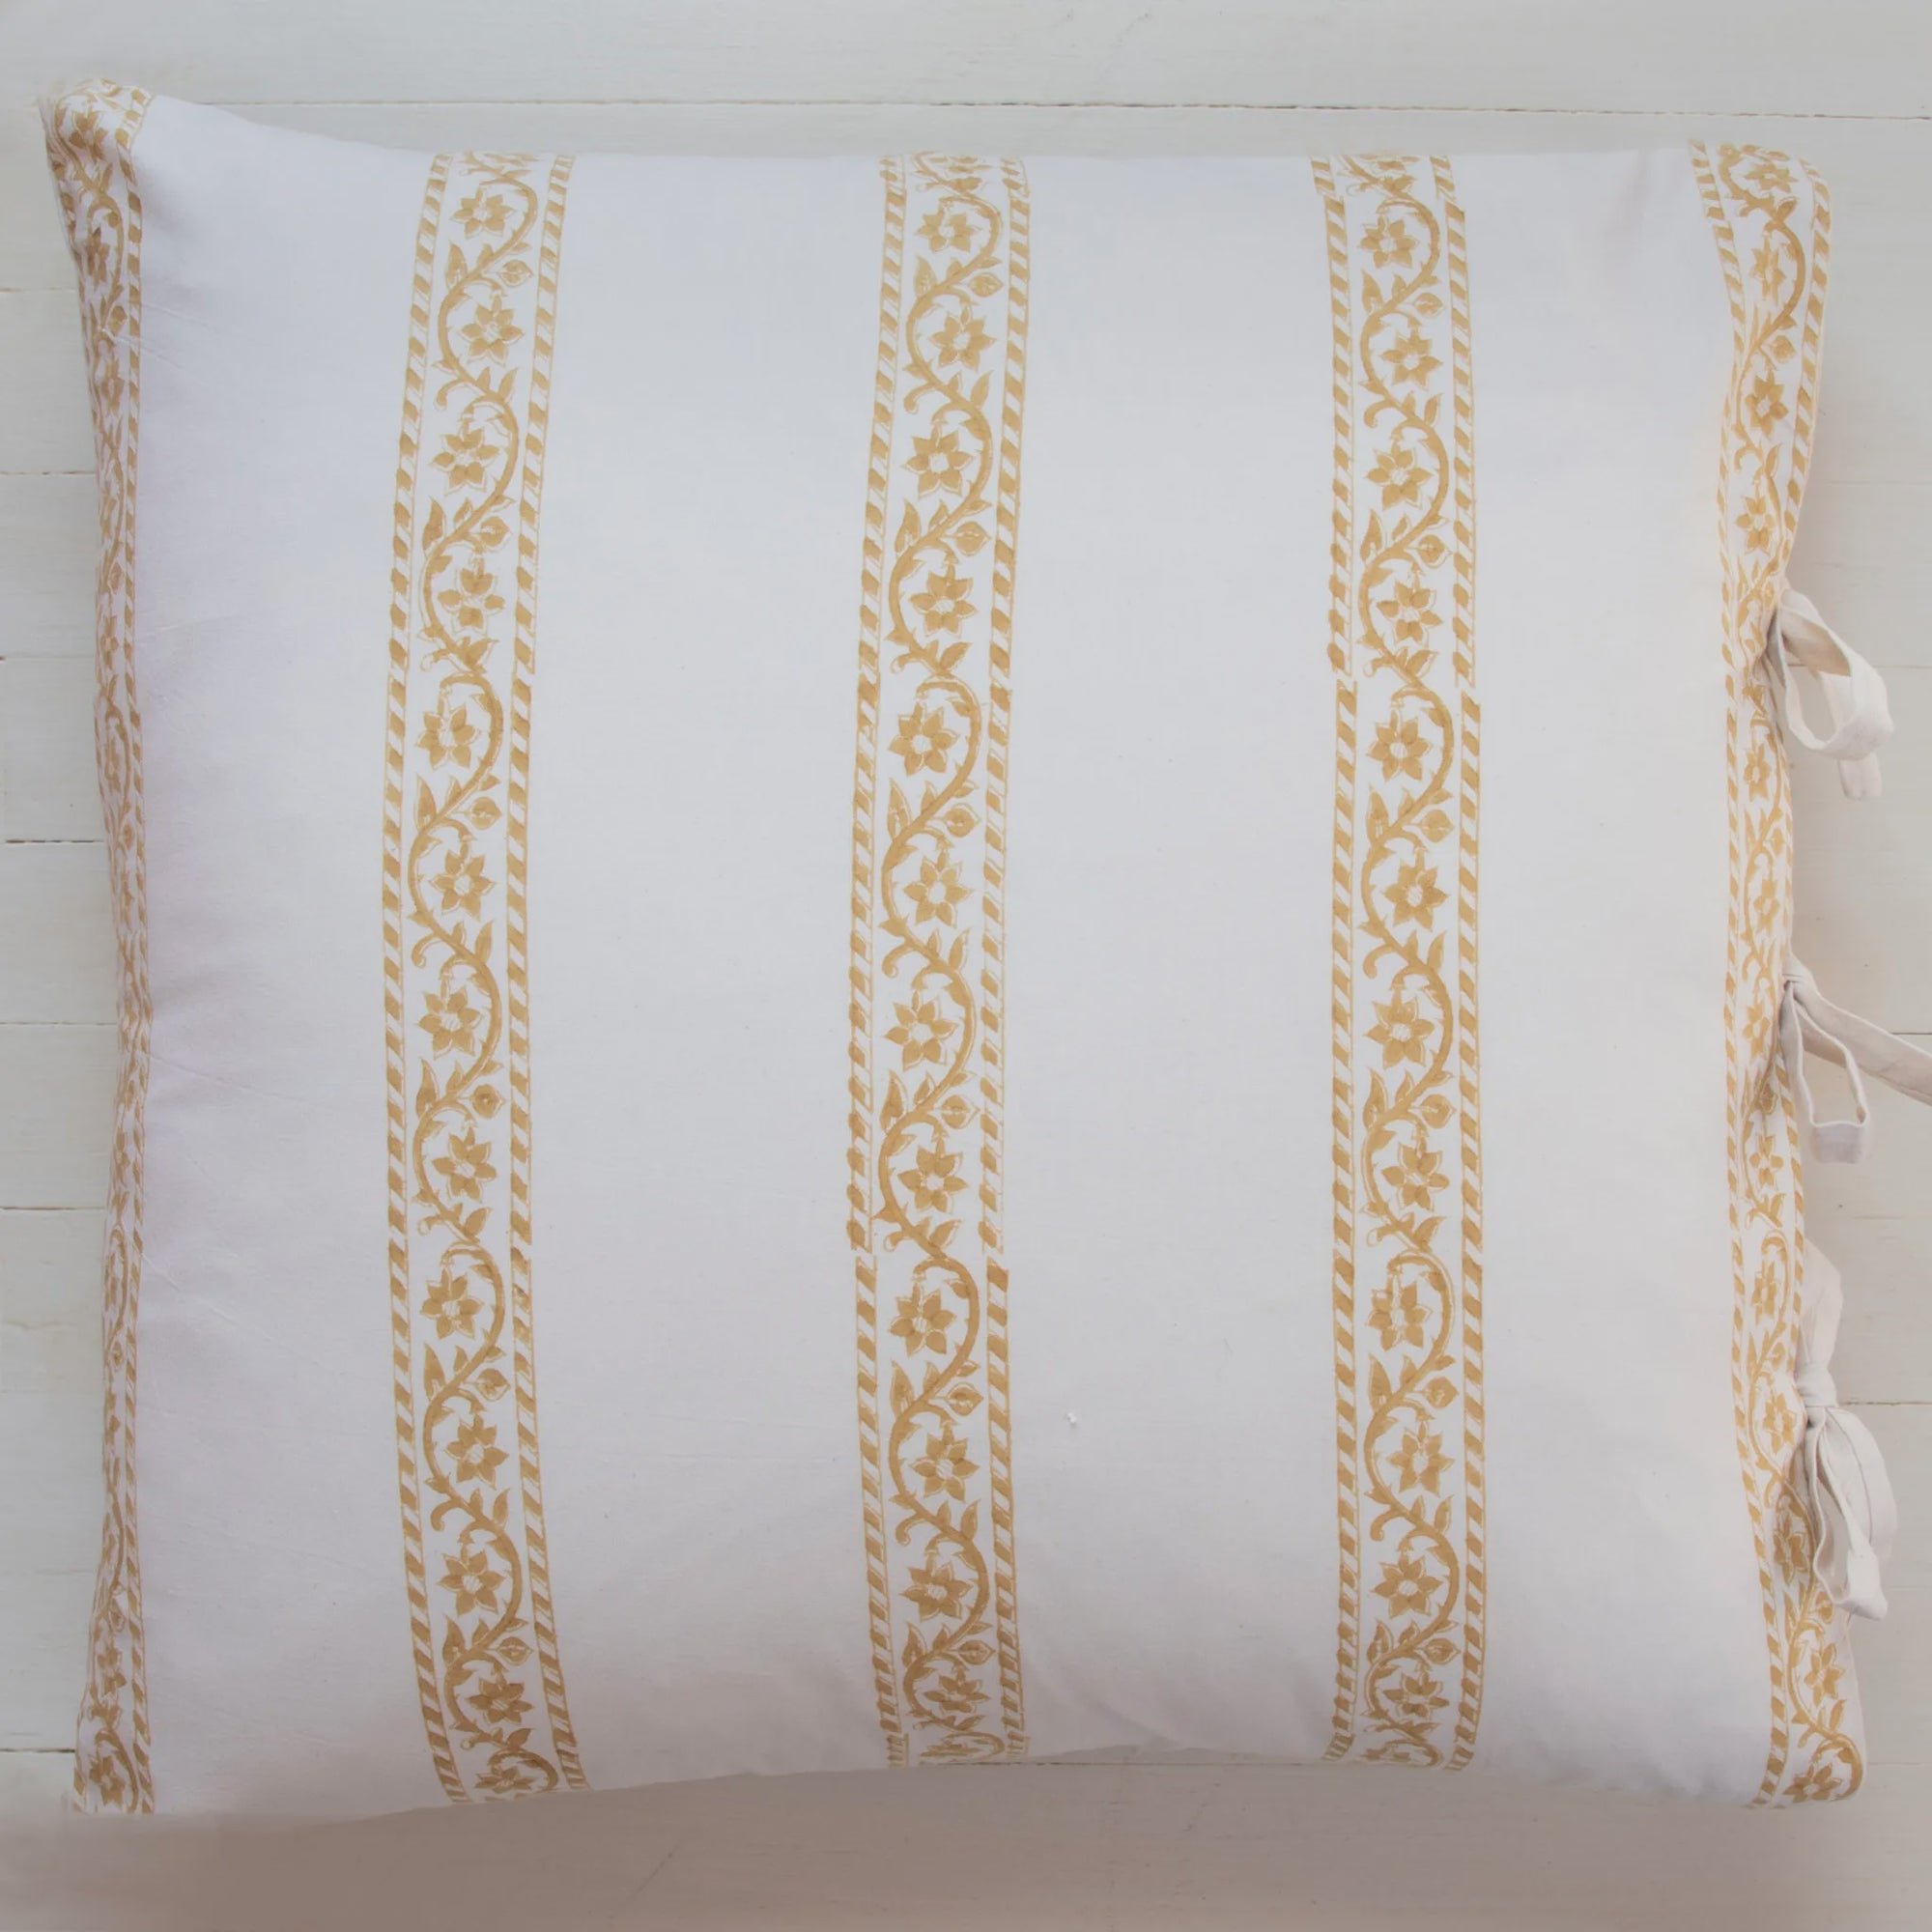 A Les Indiennes Sandrine Deco Sham Only 22x22 featuring vertical gold patterned stripes and small tied ribbons at the corners, displayed against a light wooden background in a Scottsdale Arizona bungalow.